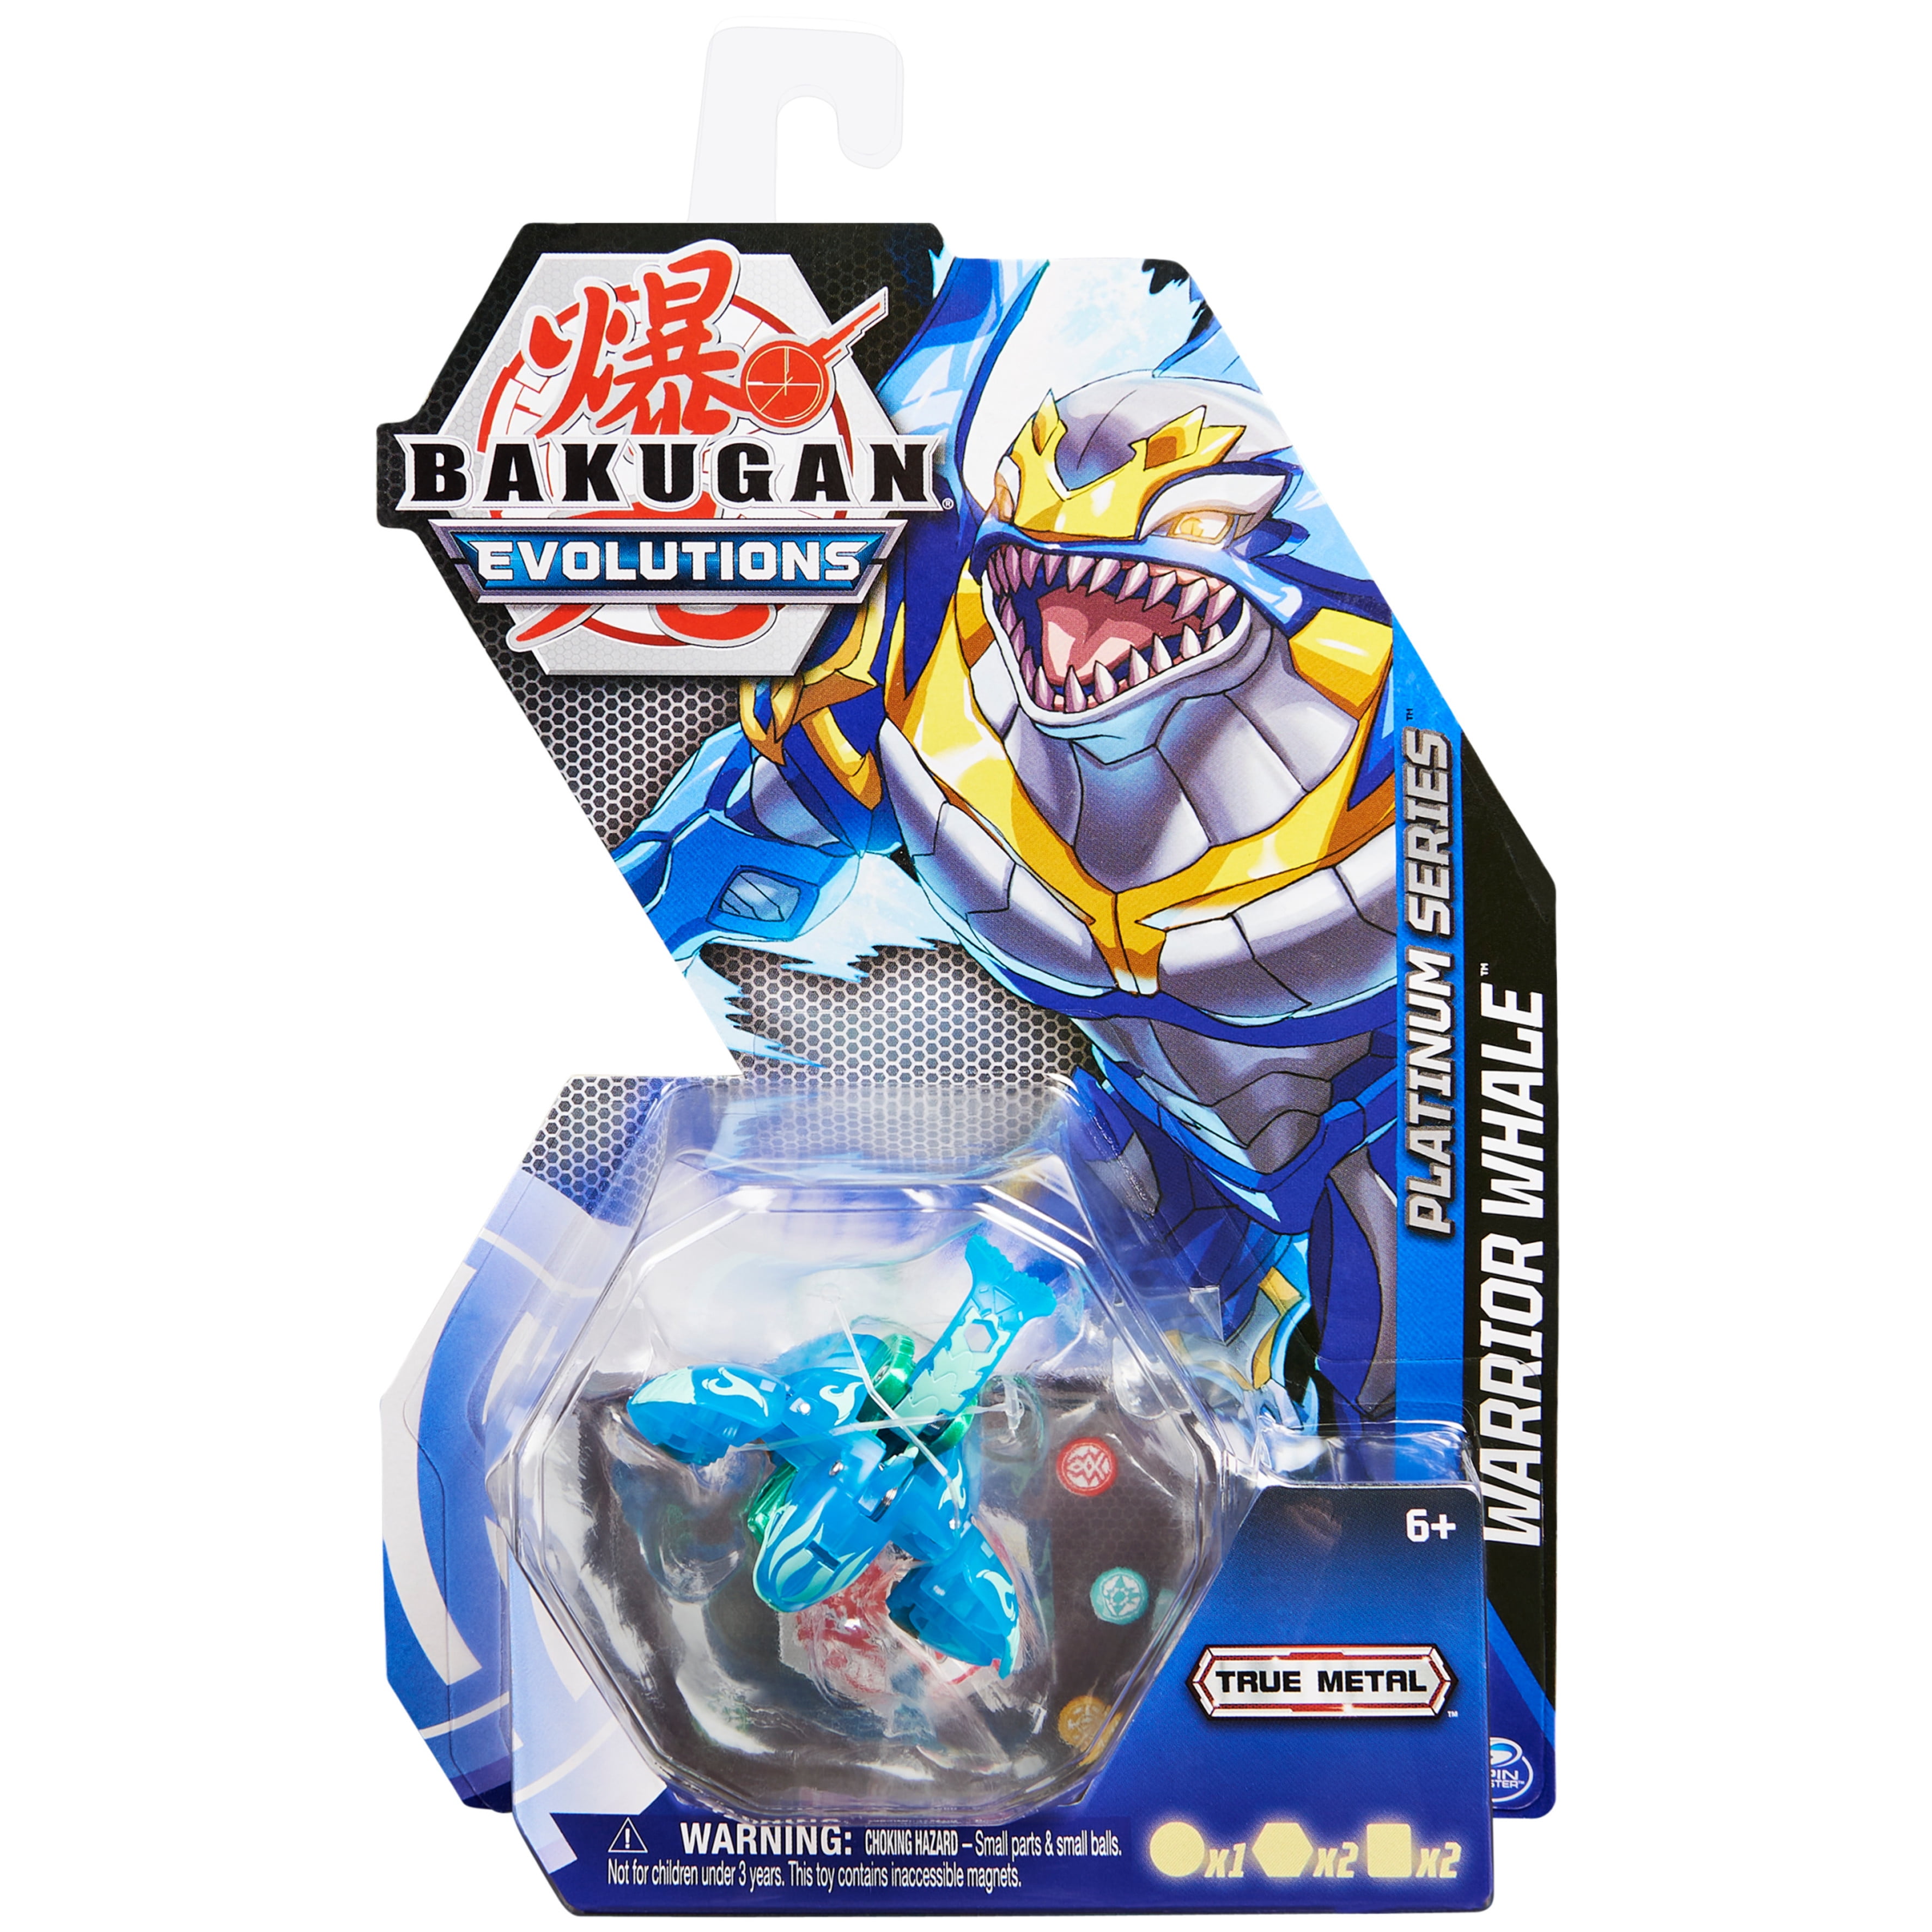 Bakugan Evolutions, Warrior Whale, Platinum Series True Metal Bakugan, 2  BakuCores and Character Card, Kids Toys for Boys, Ages 6 and Up